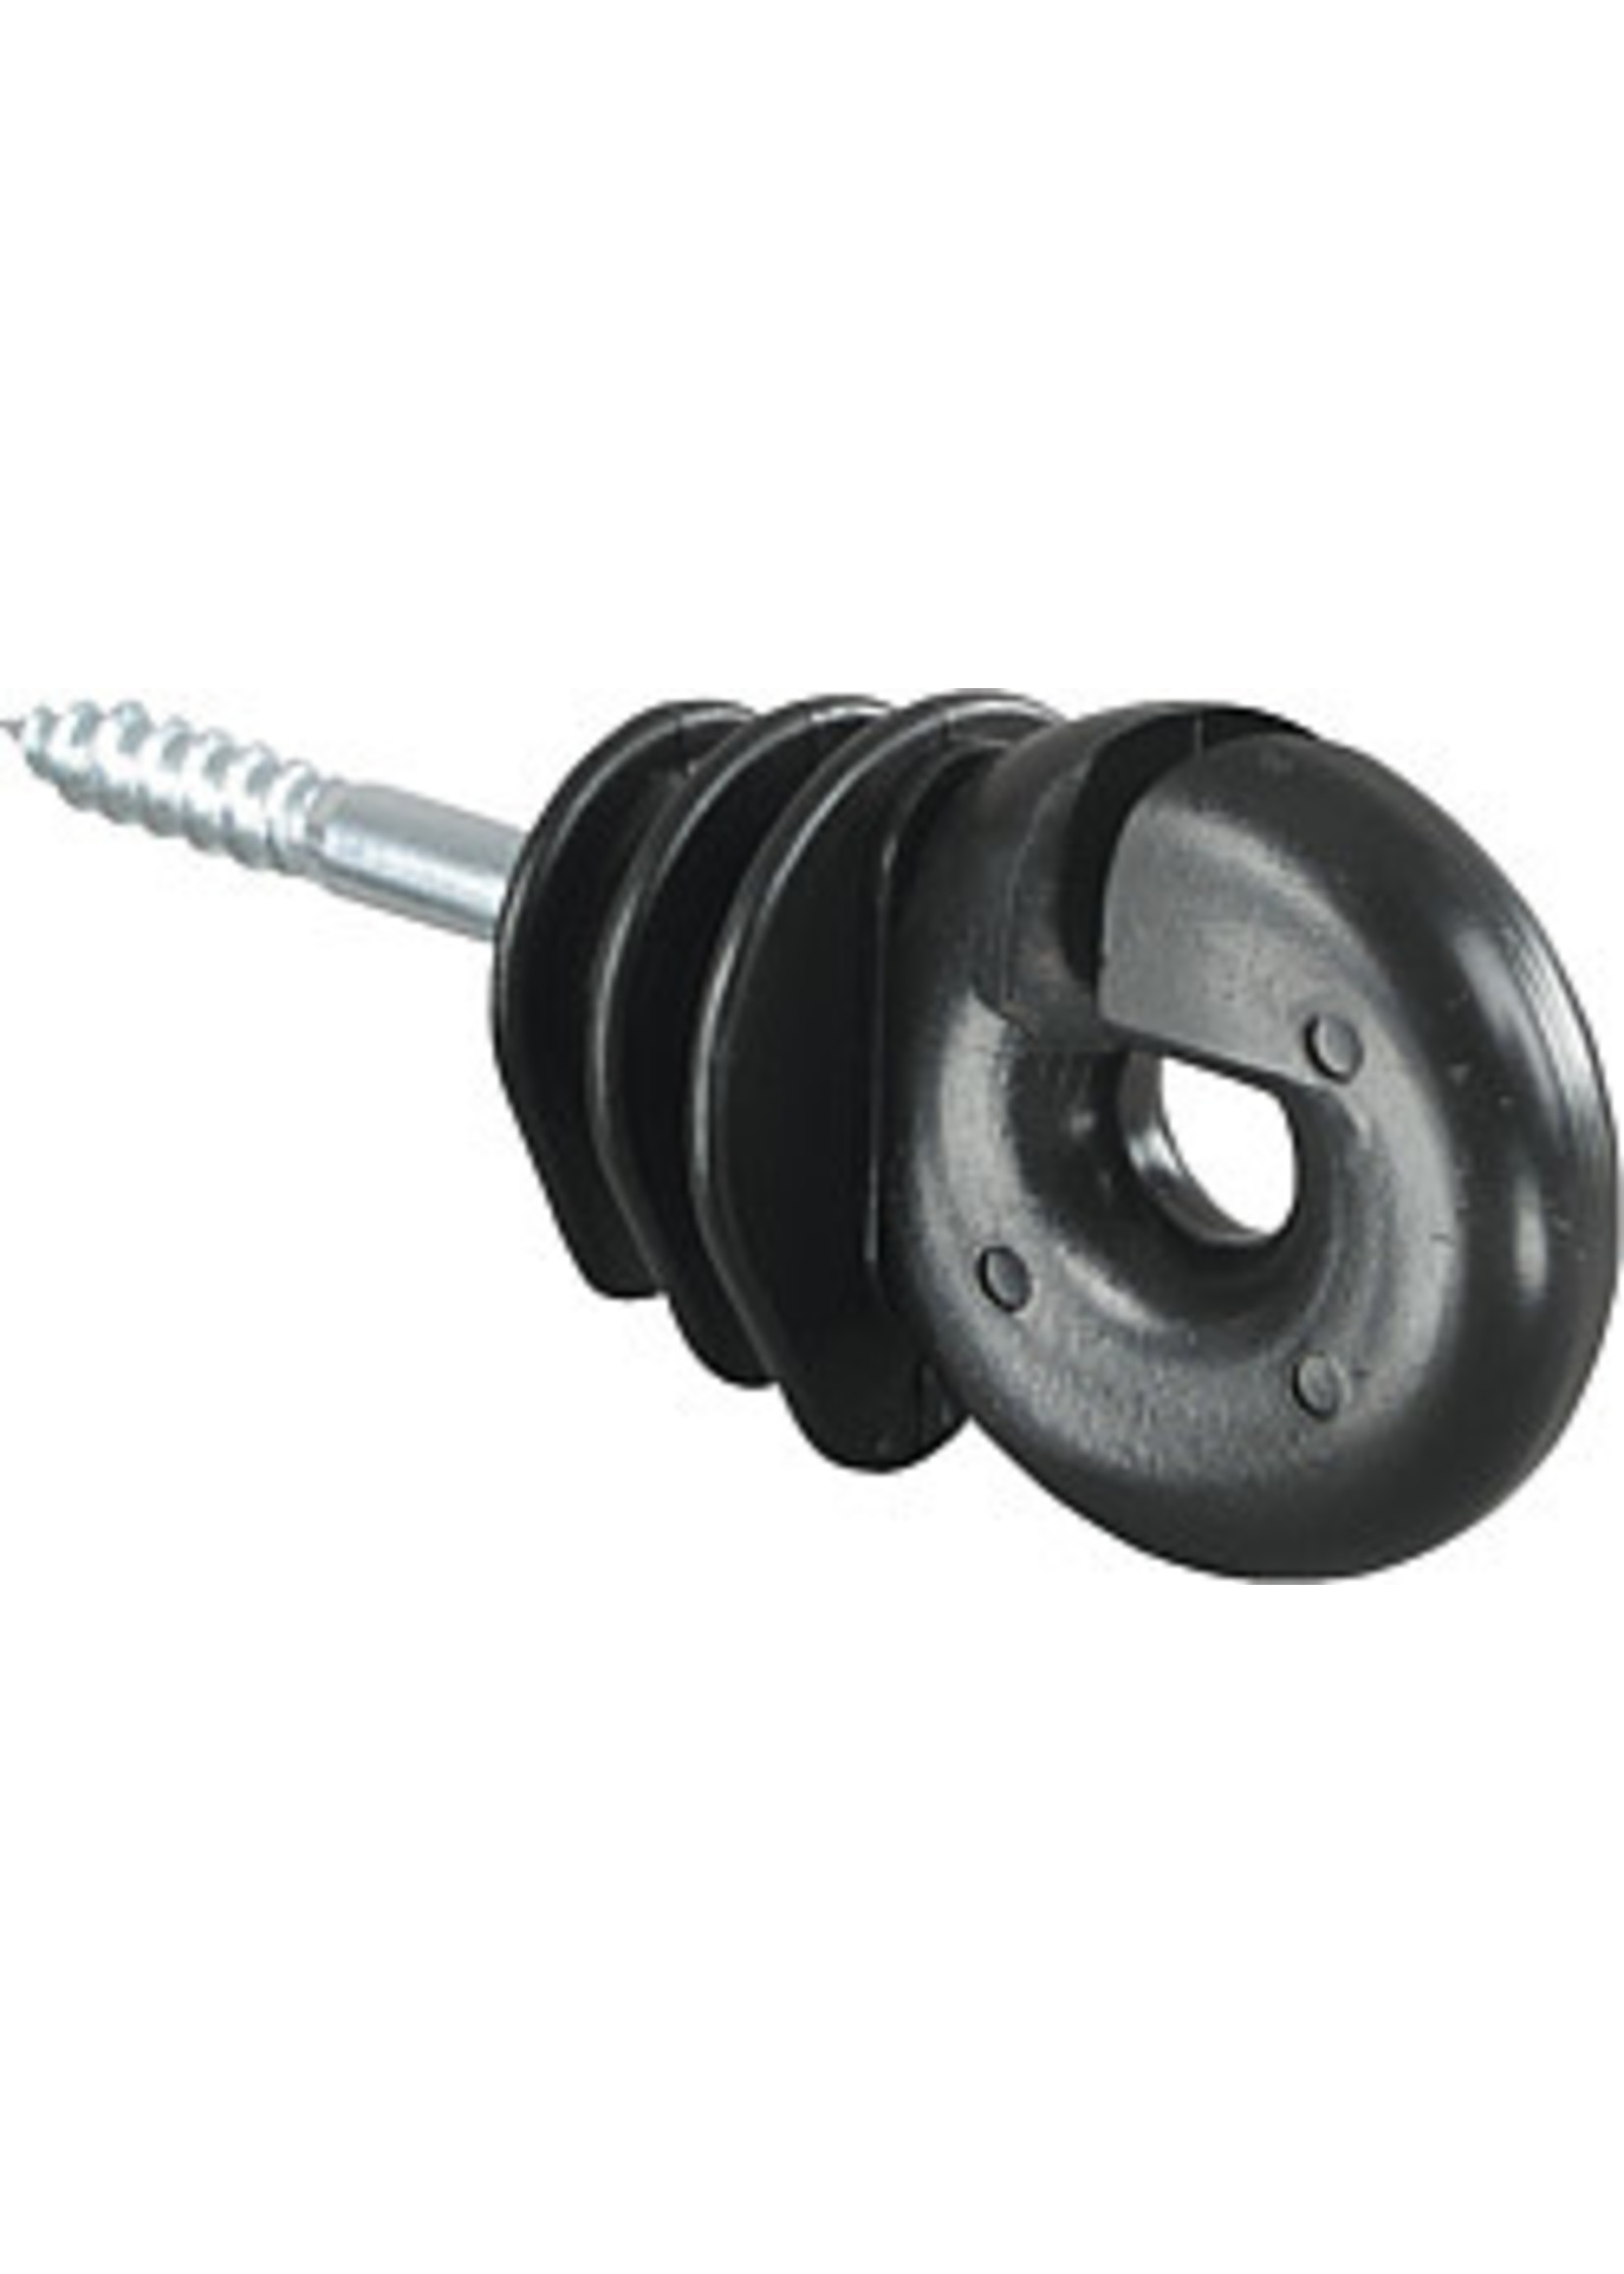 Quality ring insulator with wood screw